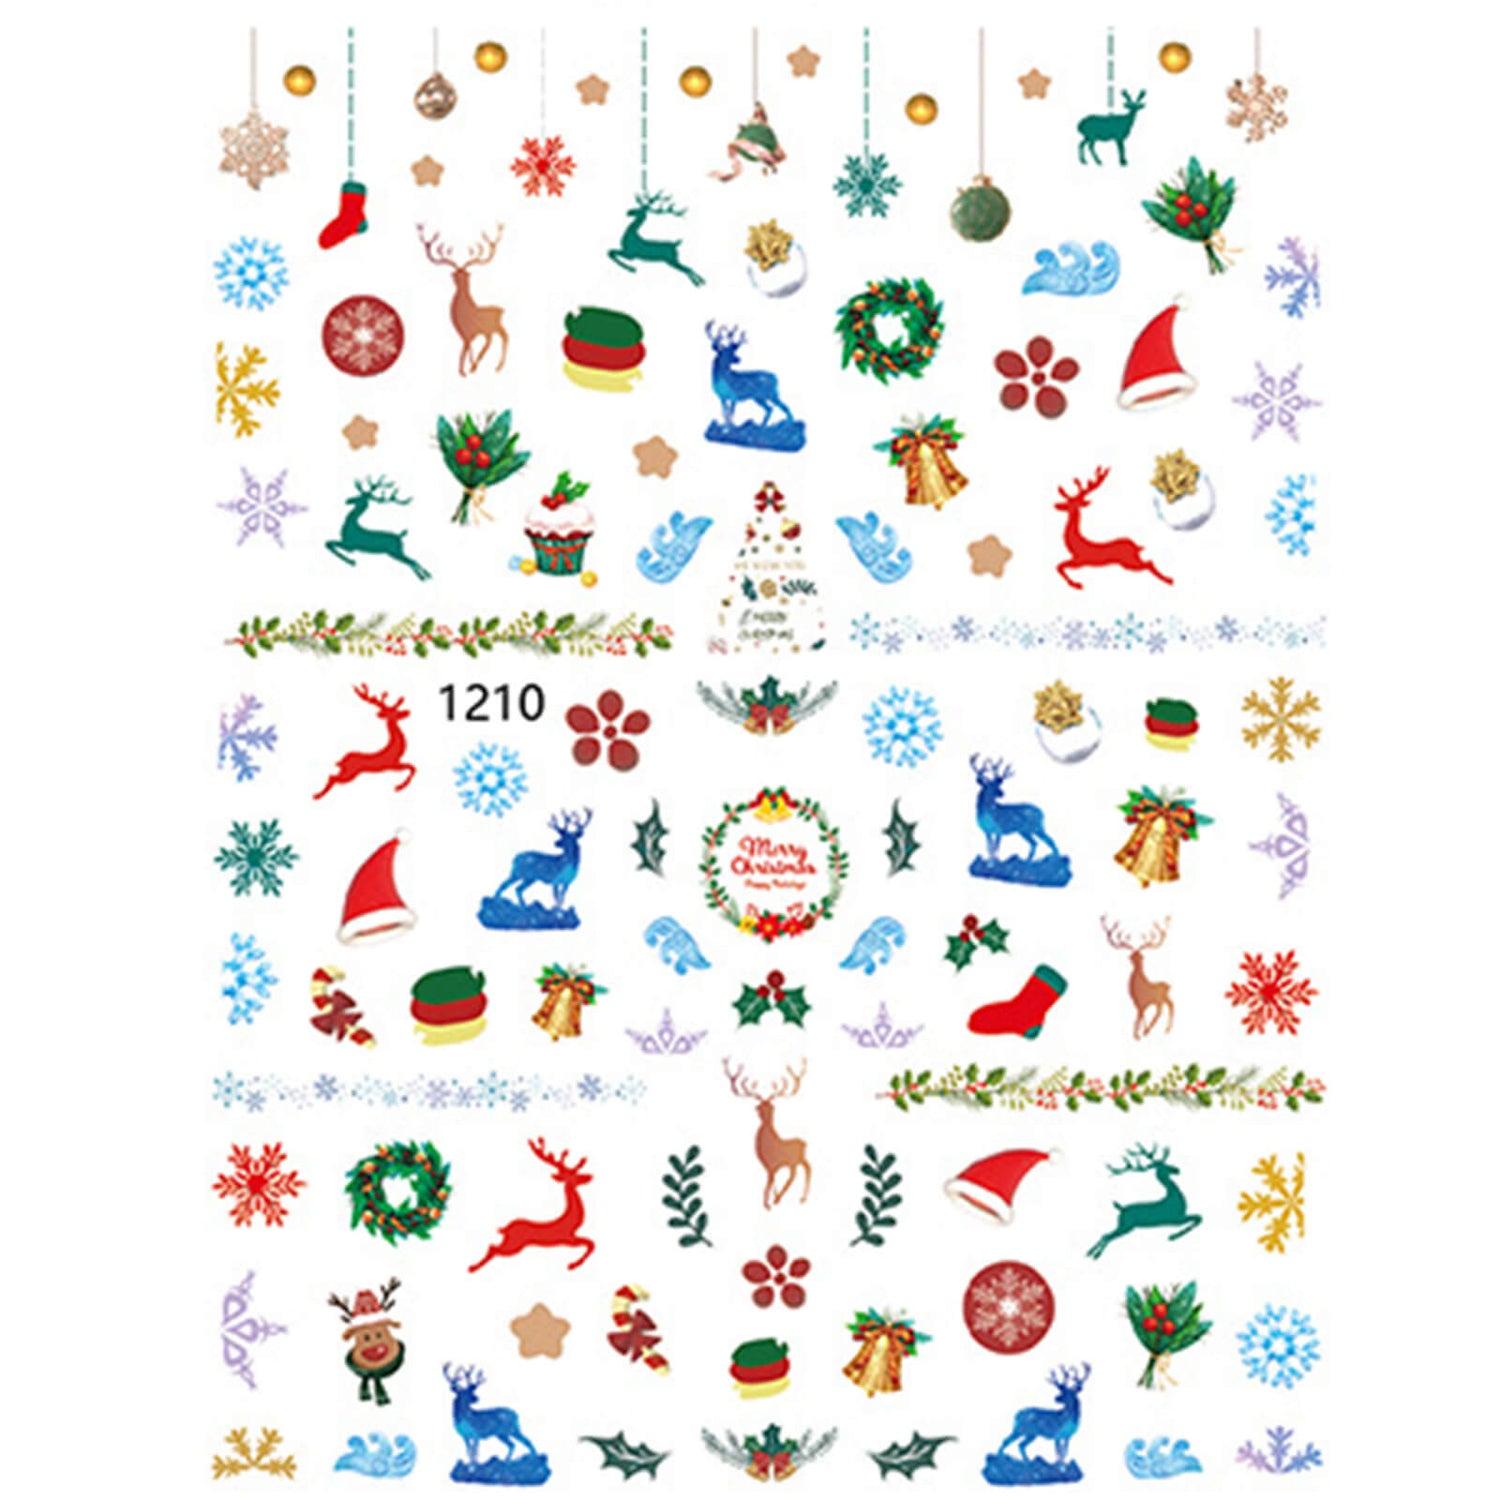     nail-stickers-winter-1210